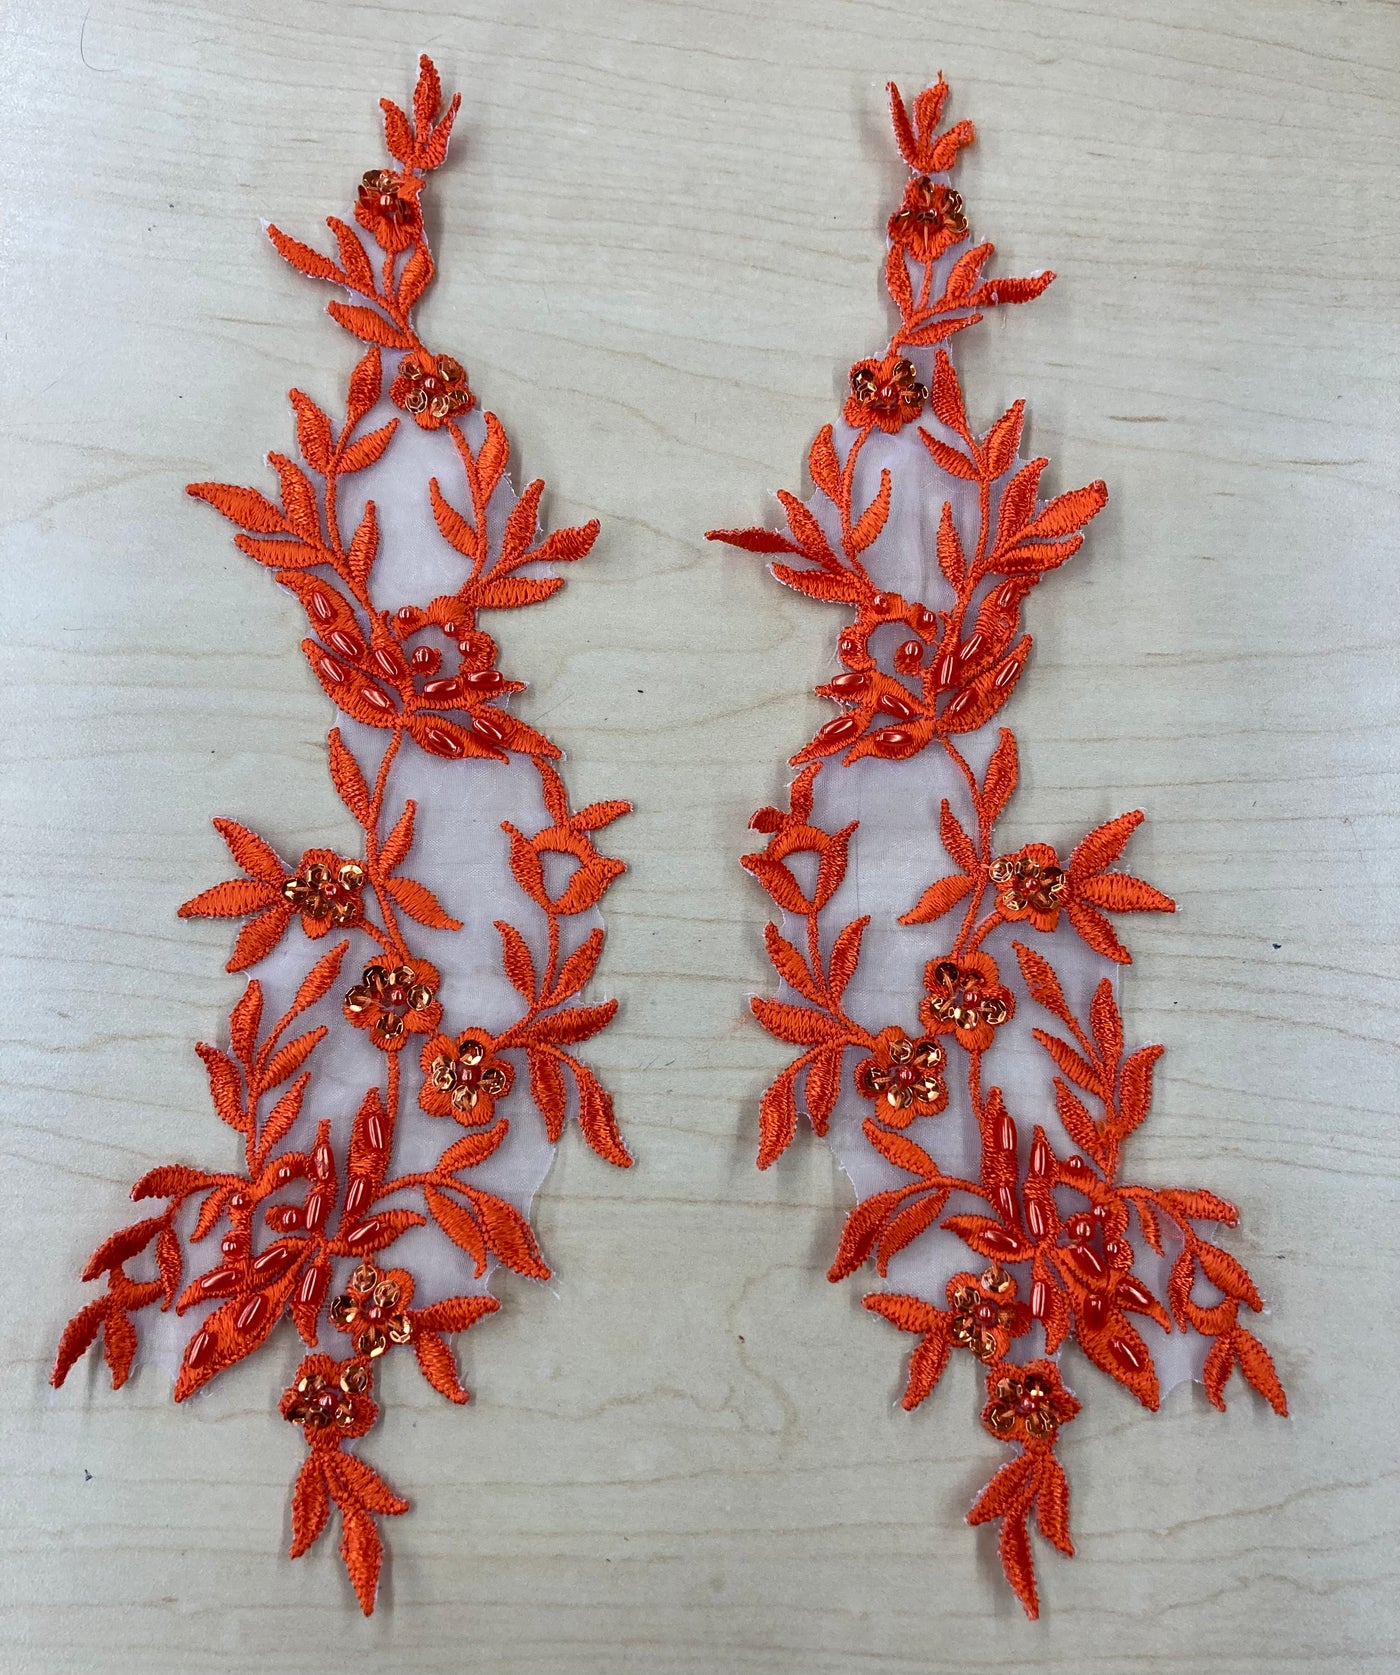 Orange Beaded Floral Applique Lace on 100% Polyester Organza Sold by the Pair. This can be allied to theatrical, dance, ballroom, costumes, bridal dresses, bridal headbands endless possibilities.  Lace Usa